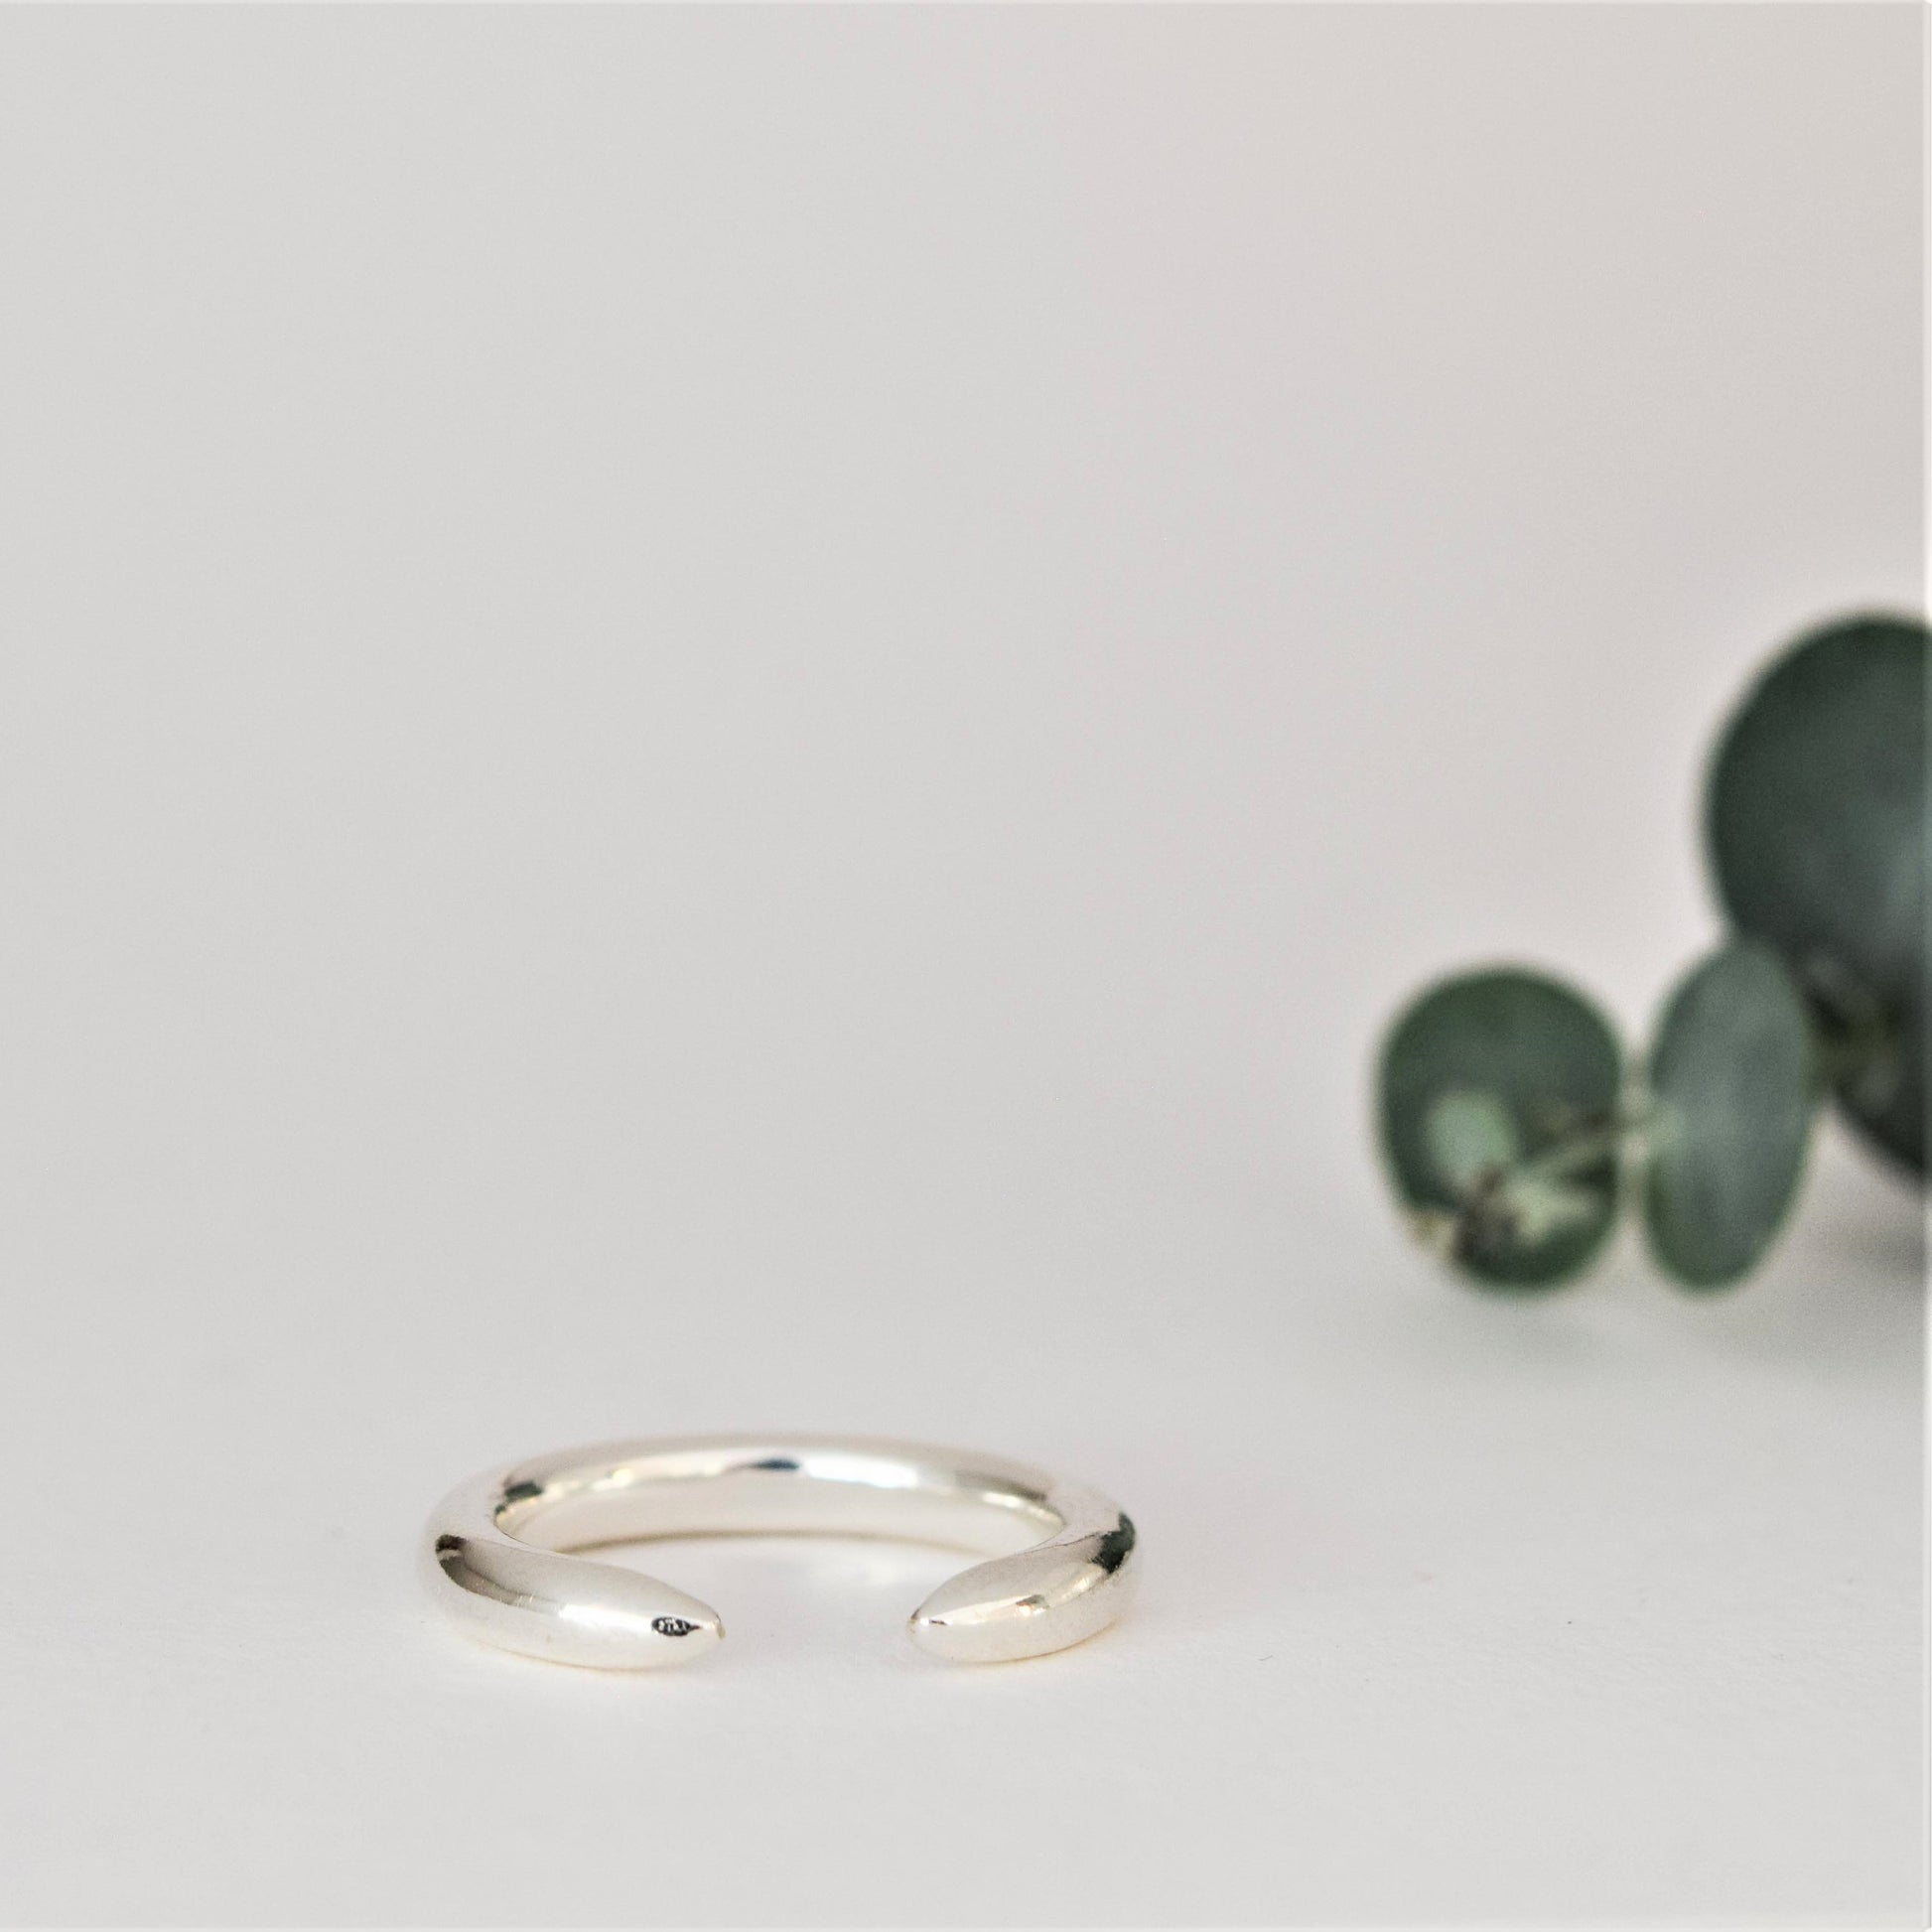 Product image of Cuff ring